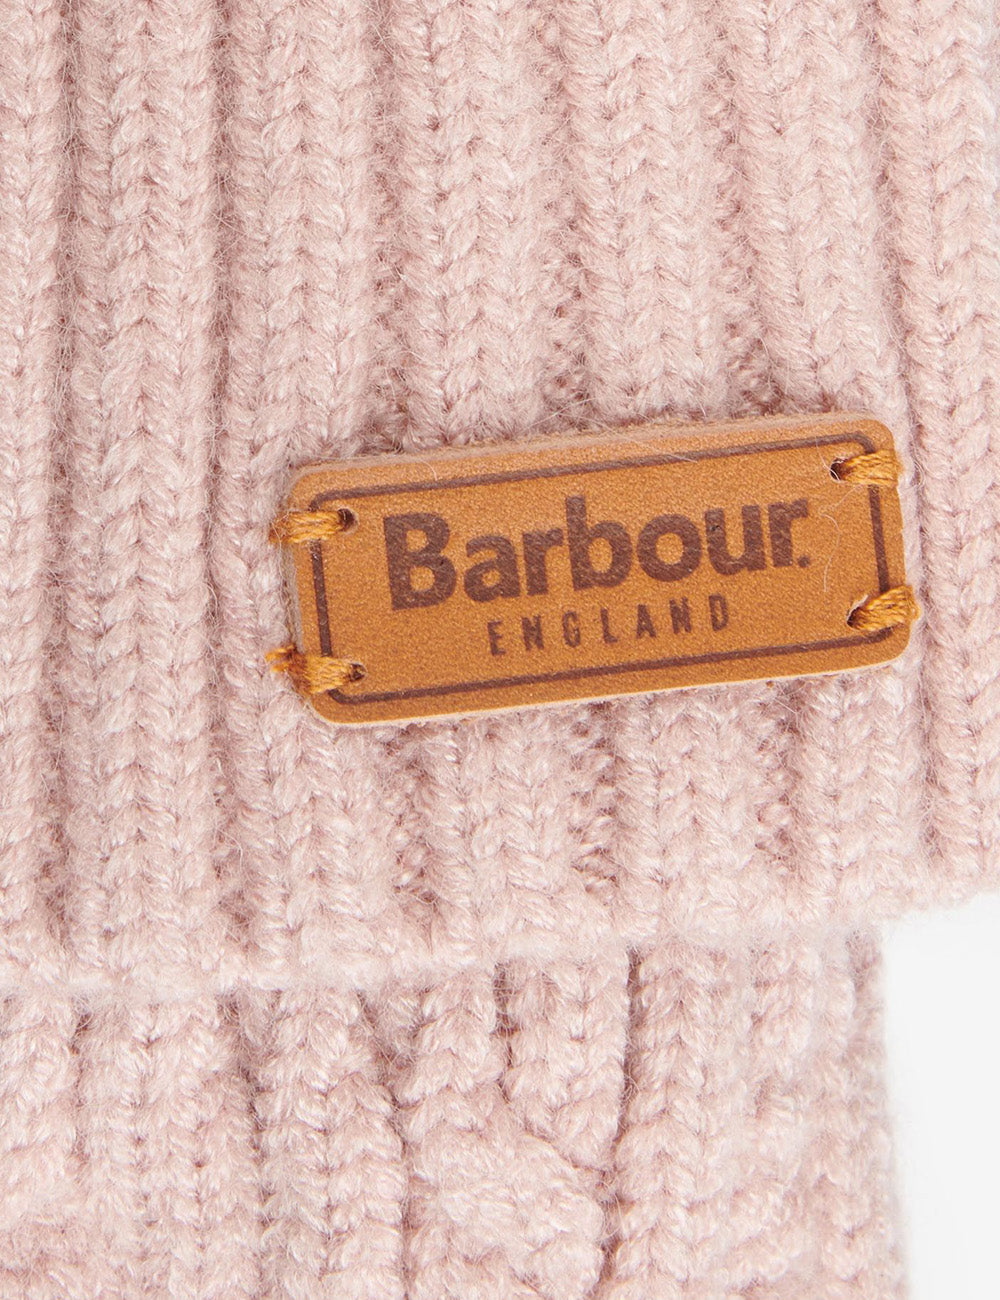 Barbour Alnwick Knitted Gloves - Rose Pink